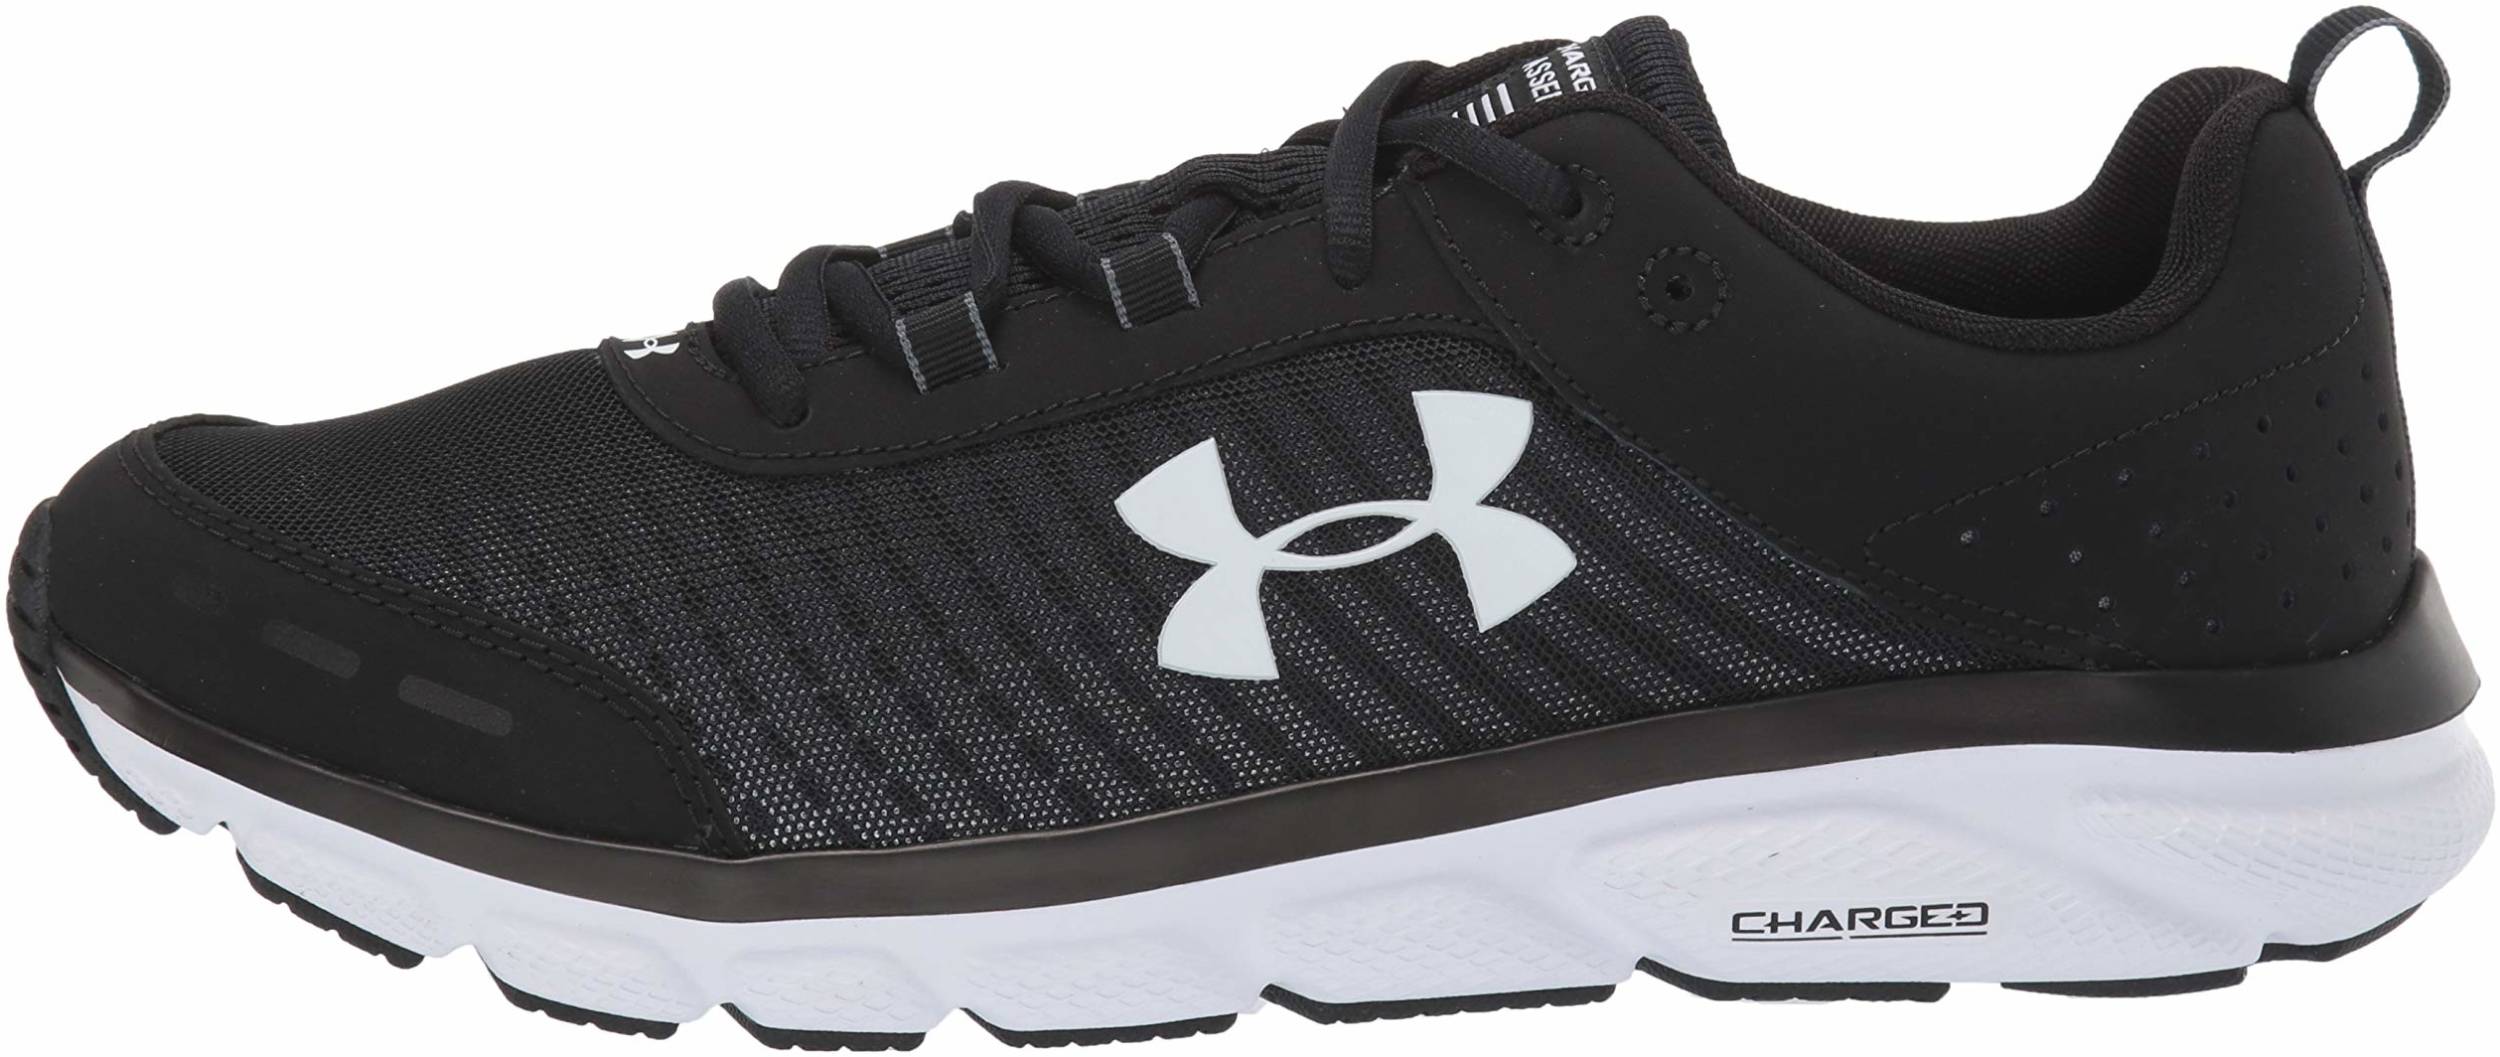 Under Armour Road Running Shoes 